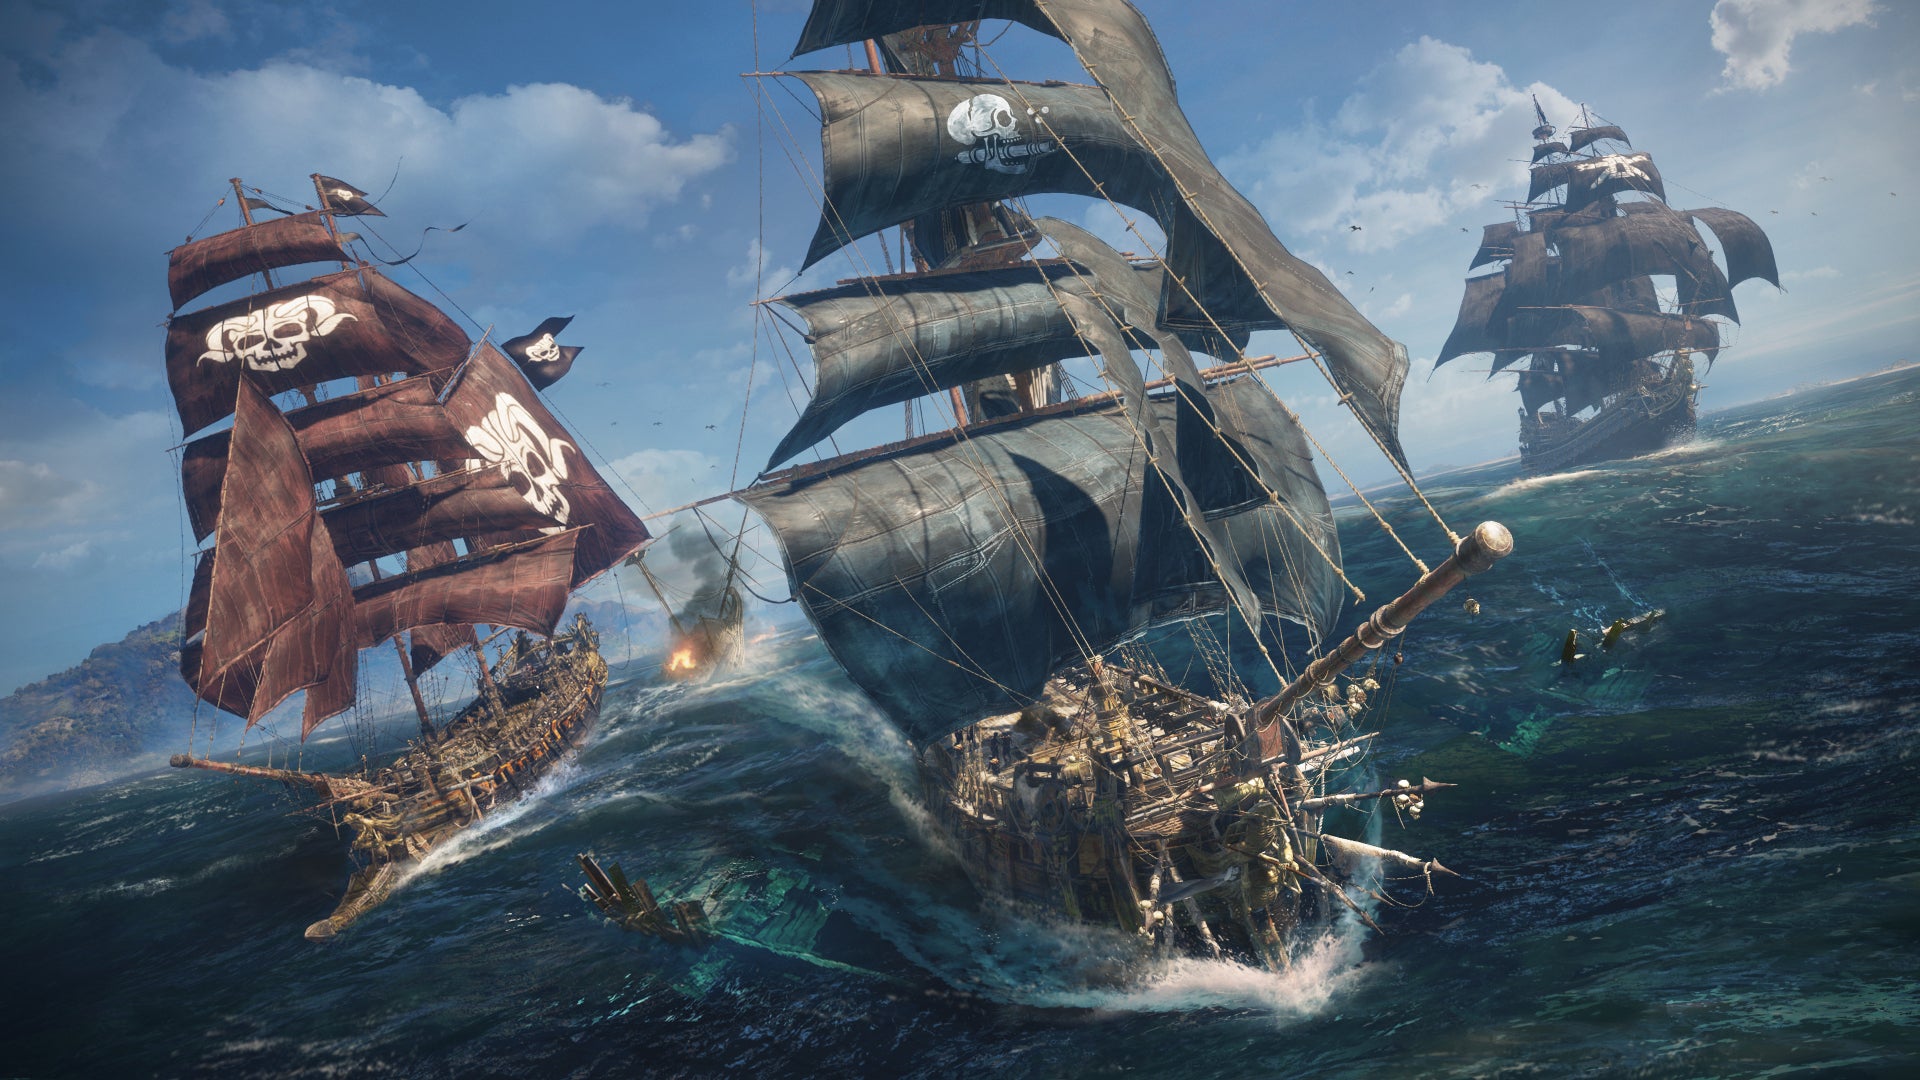 Three pirate ships sail alongside each other on the Indian Ocean in Ubisoft game, Skull and Bones.